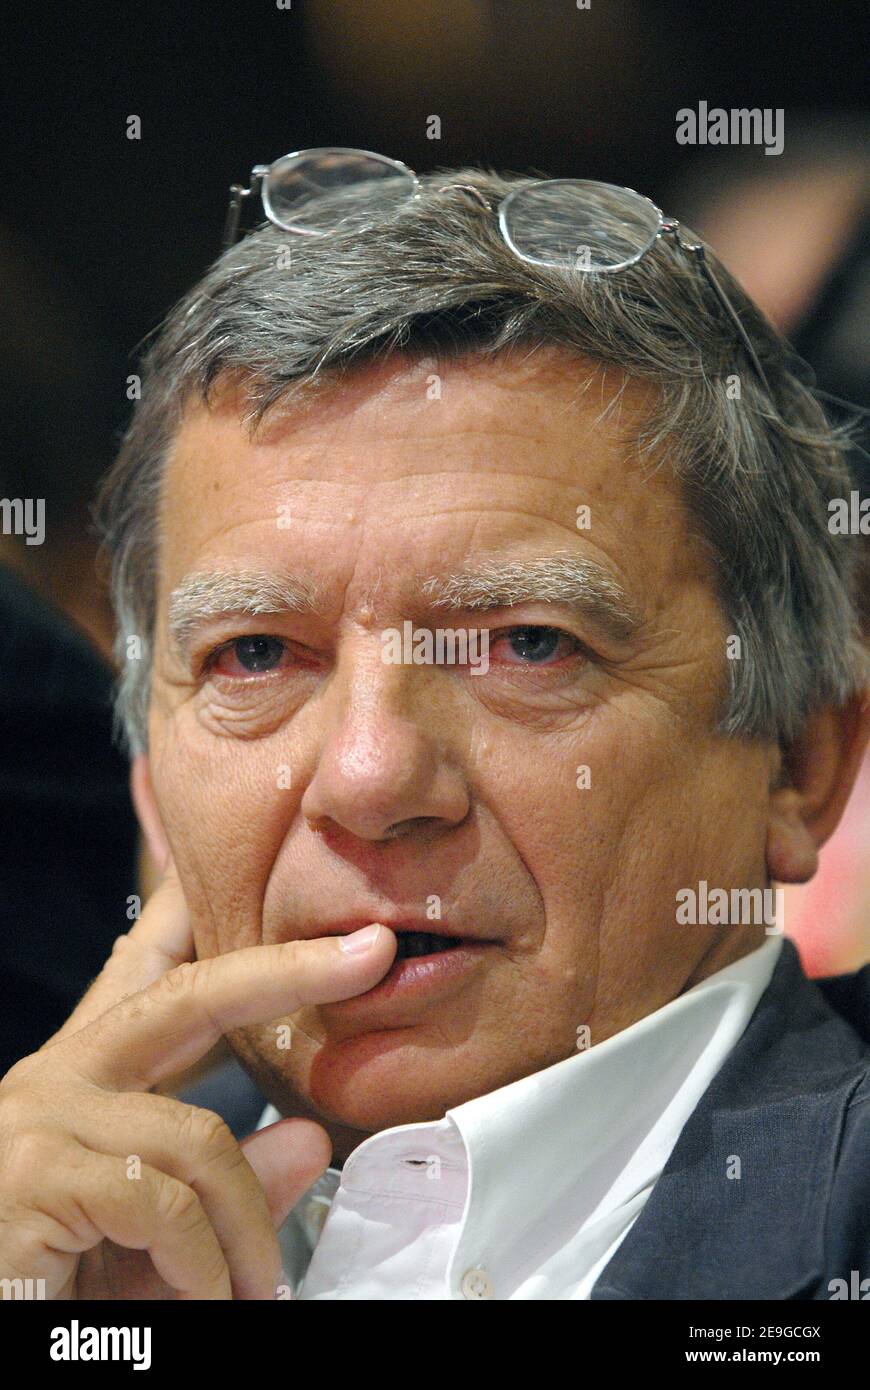 Socialist party member Jean Glavany during the Socialist National  Convention meeting at the 'Maison de la Mutualite' in Paris, France, on  July 1, 2006. Photo by Christophe Guibbaud/ABACAPRESS.COM Stock Photo -  Alamy